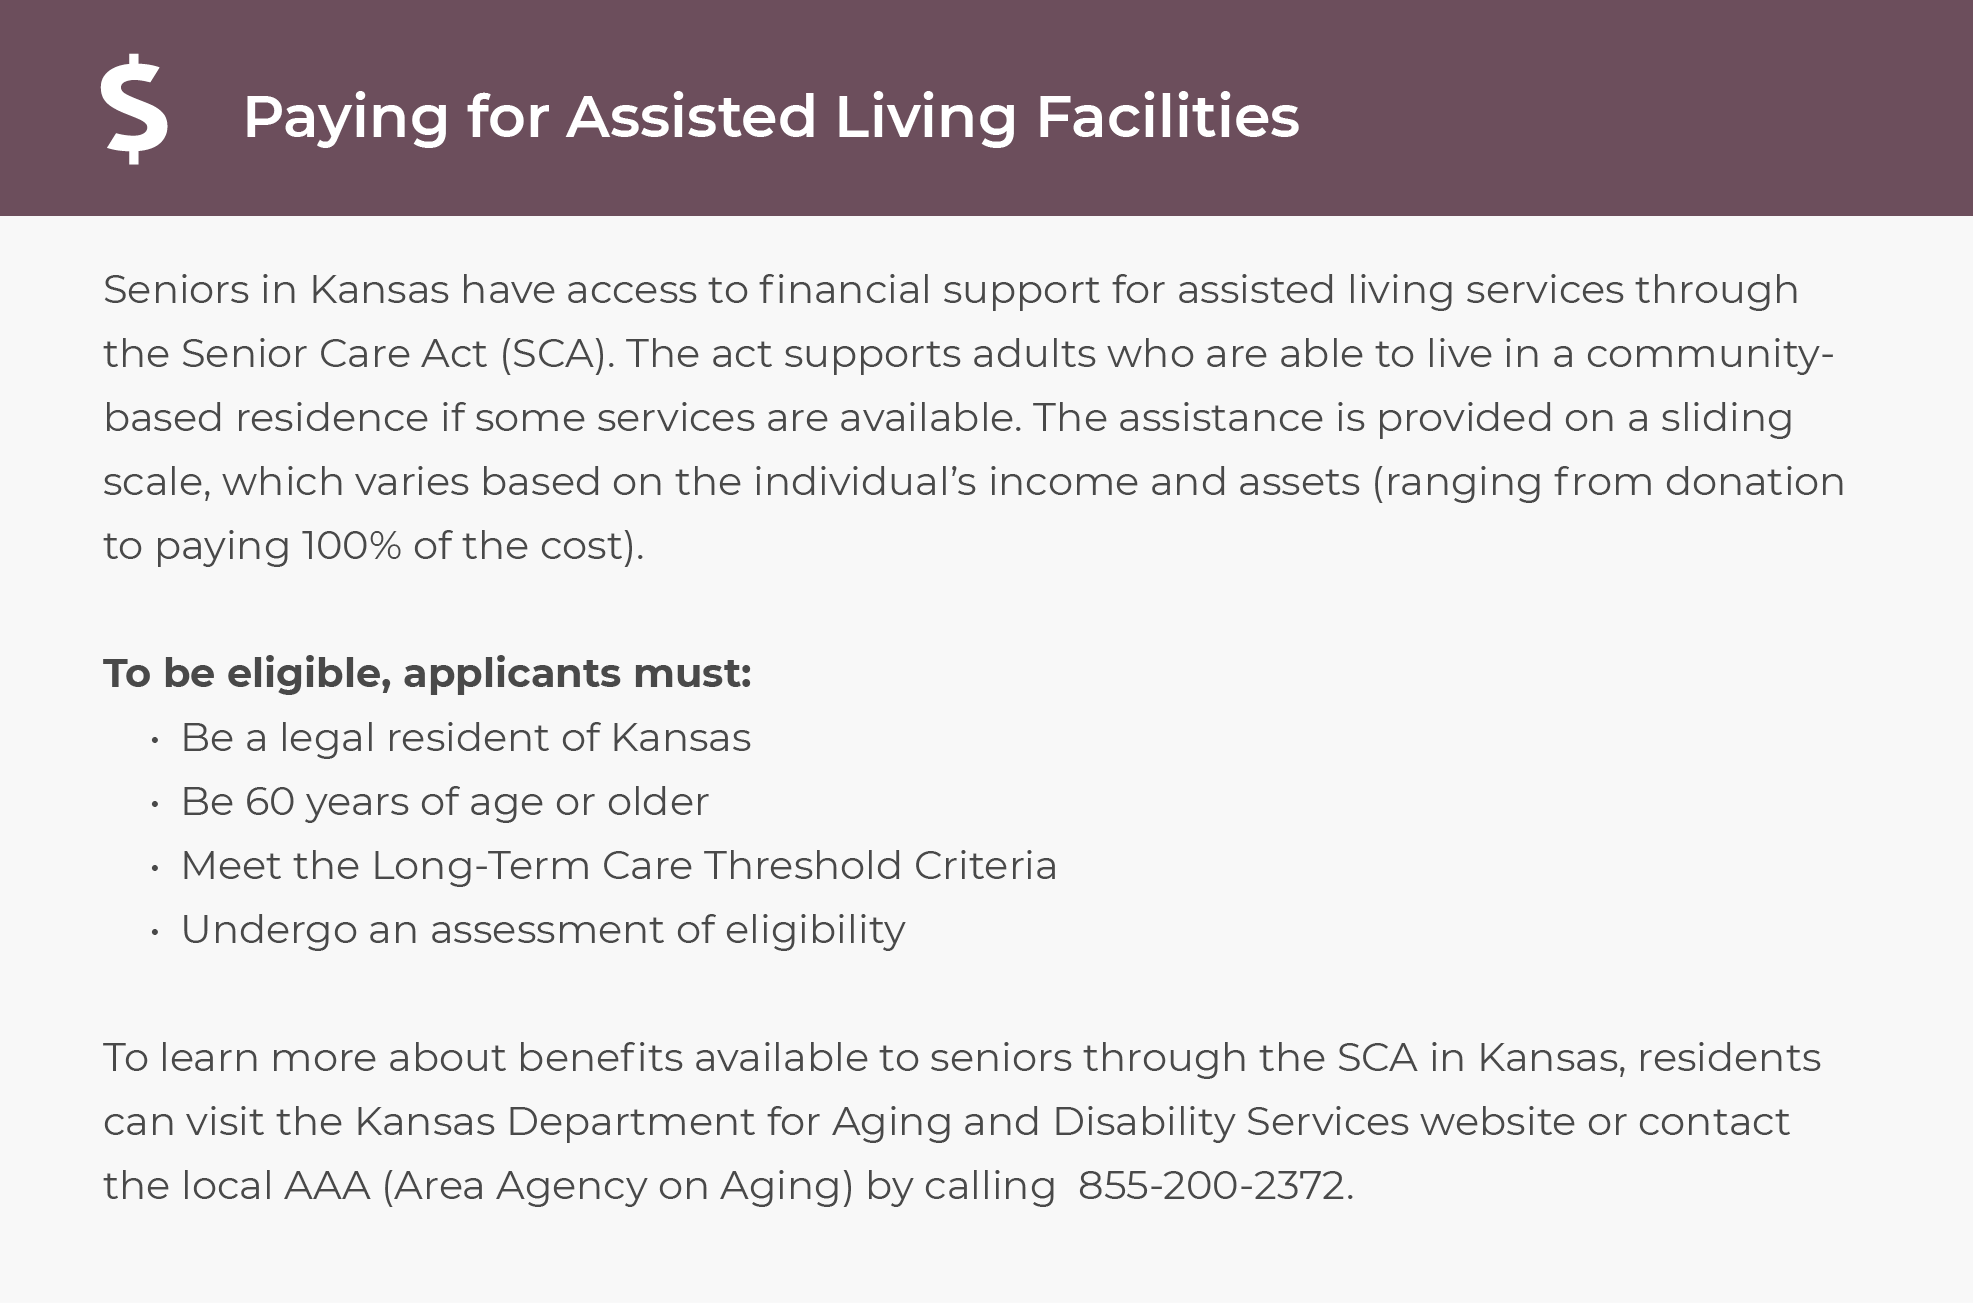 Paying for Assisted Living in Kansas